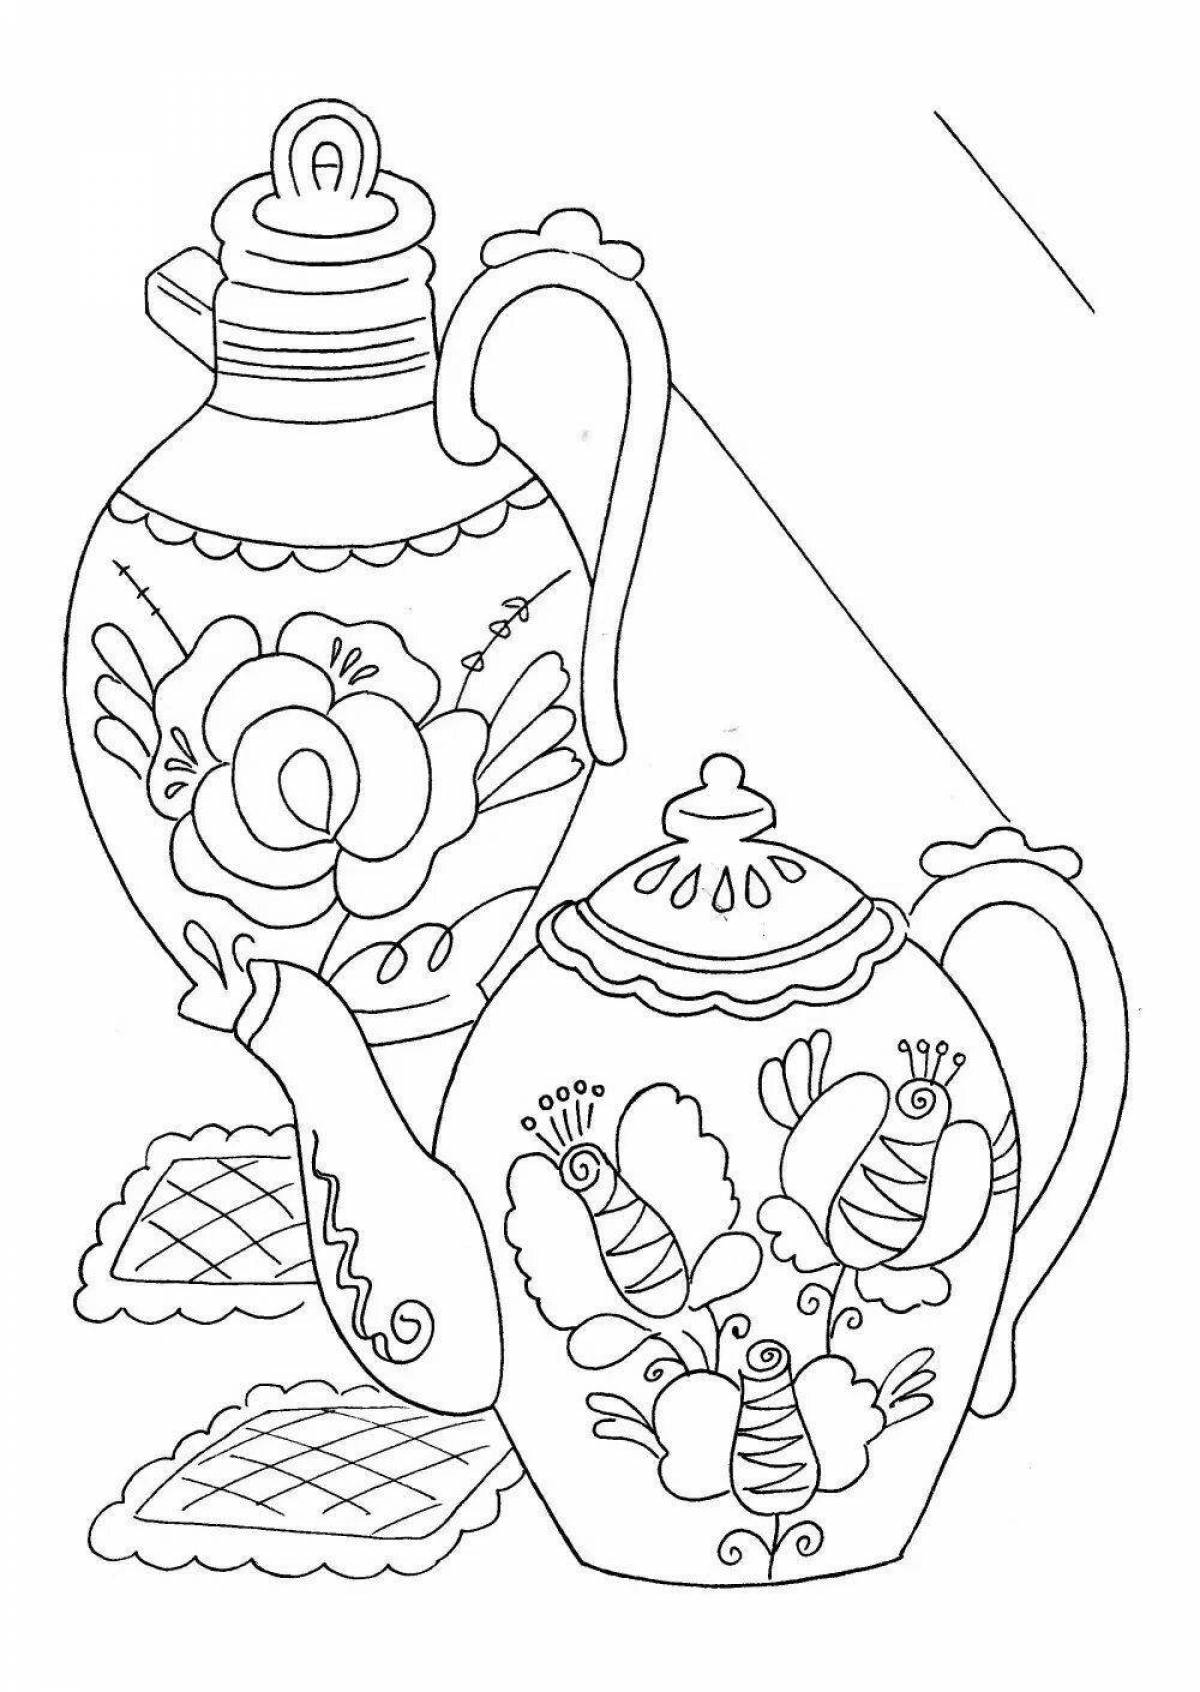 Sublime Russian folk art coloring page